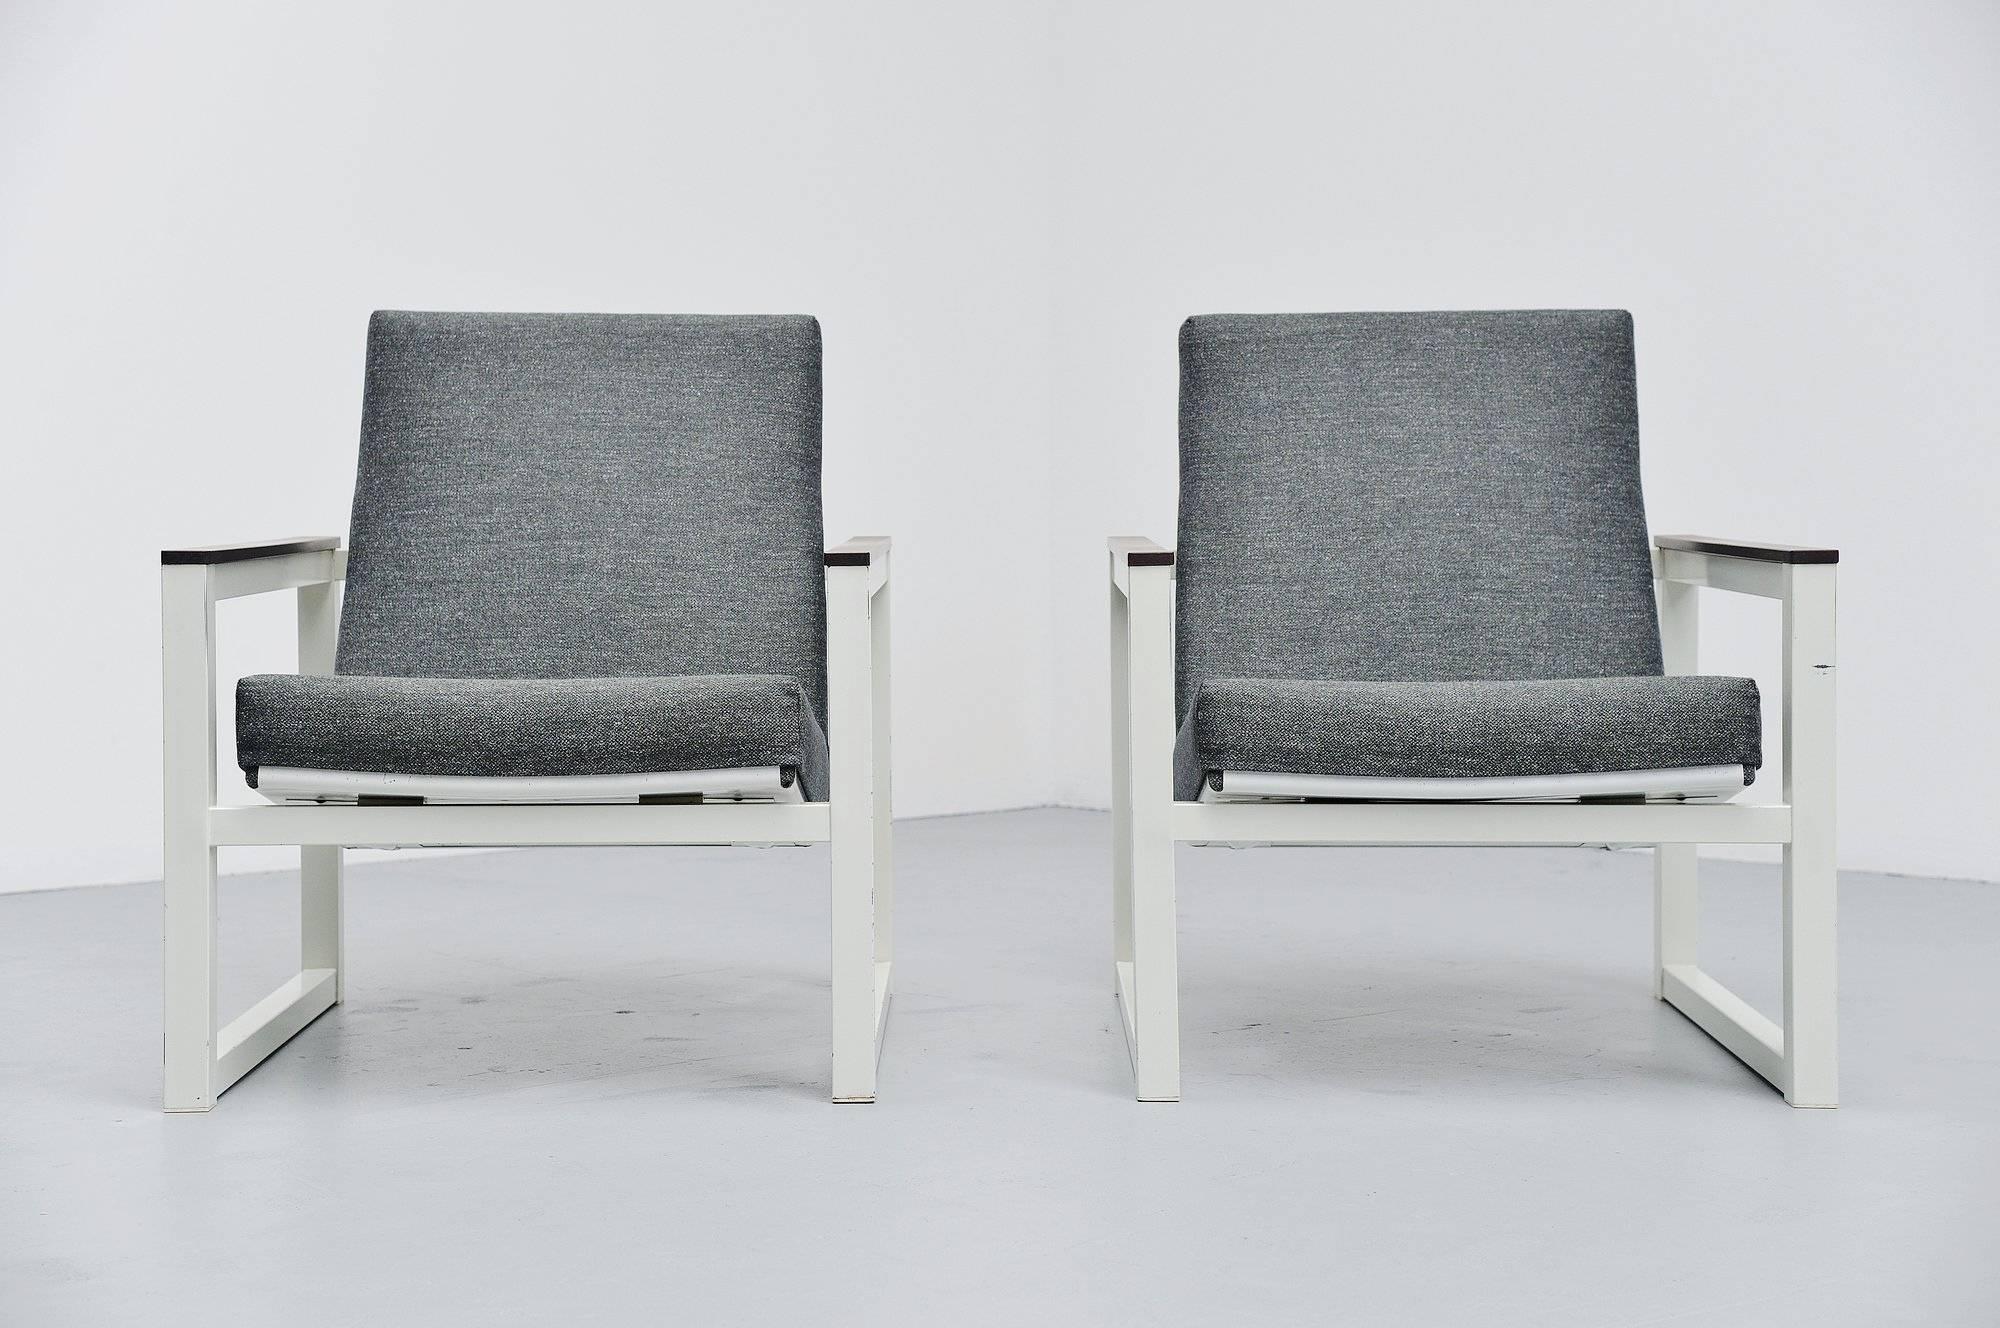 Very nice pair of Industrial lounge chairs designed by a due of Industrial designers. The chair was designed by Tjerk Reijenga for Pilastro, 1965, the seating structure was designed by Friso Kramer for Ahrend de Cirkel, 1959. The chair is also